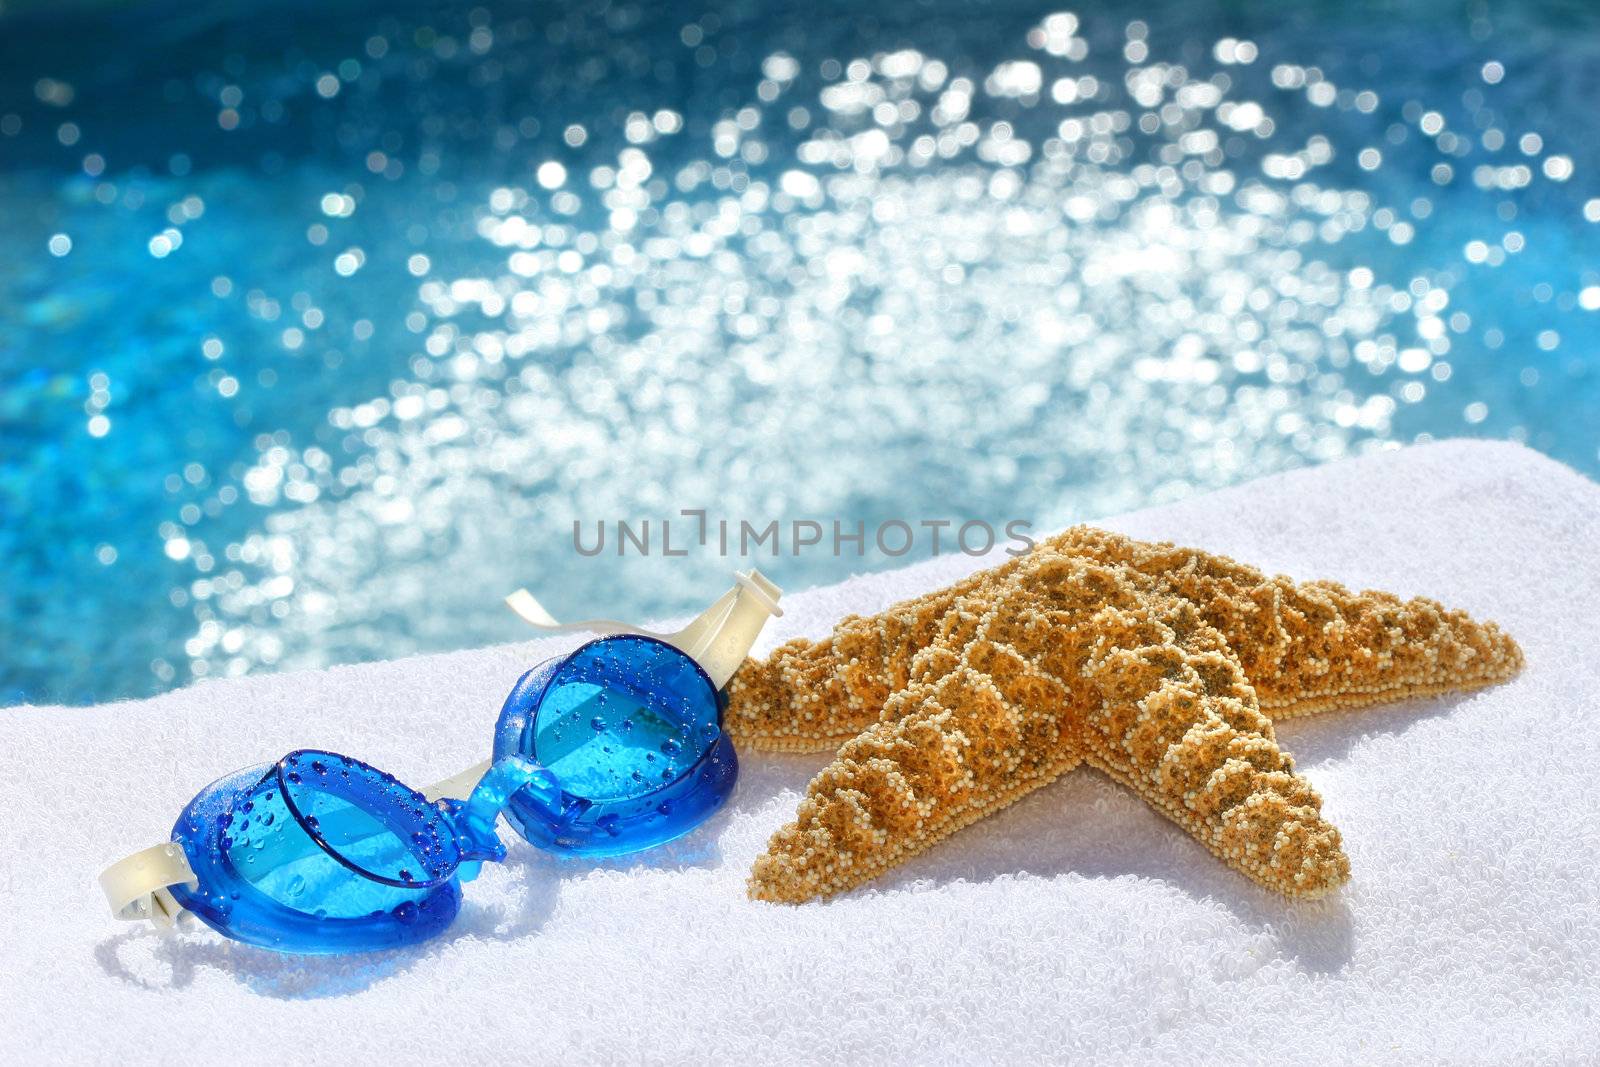 Under water goggles with starfish by Sandralise